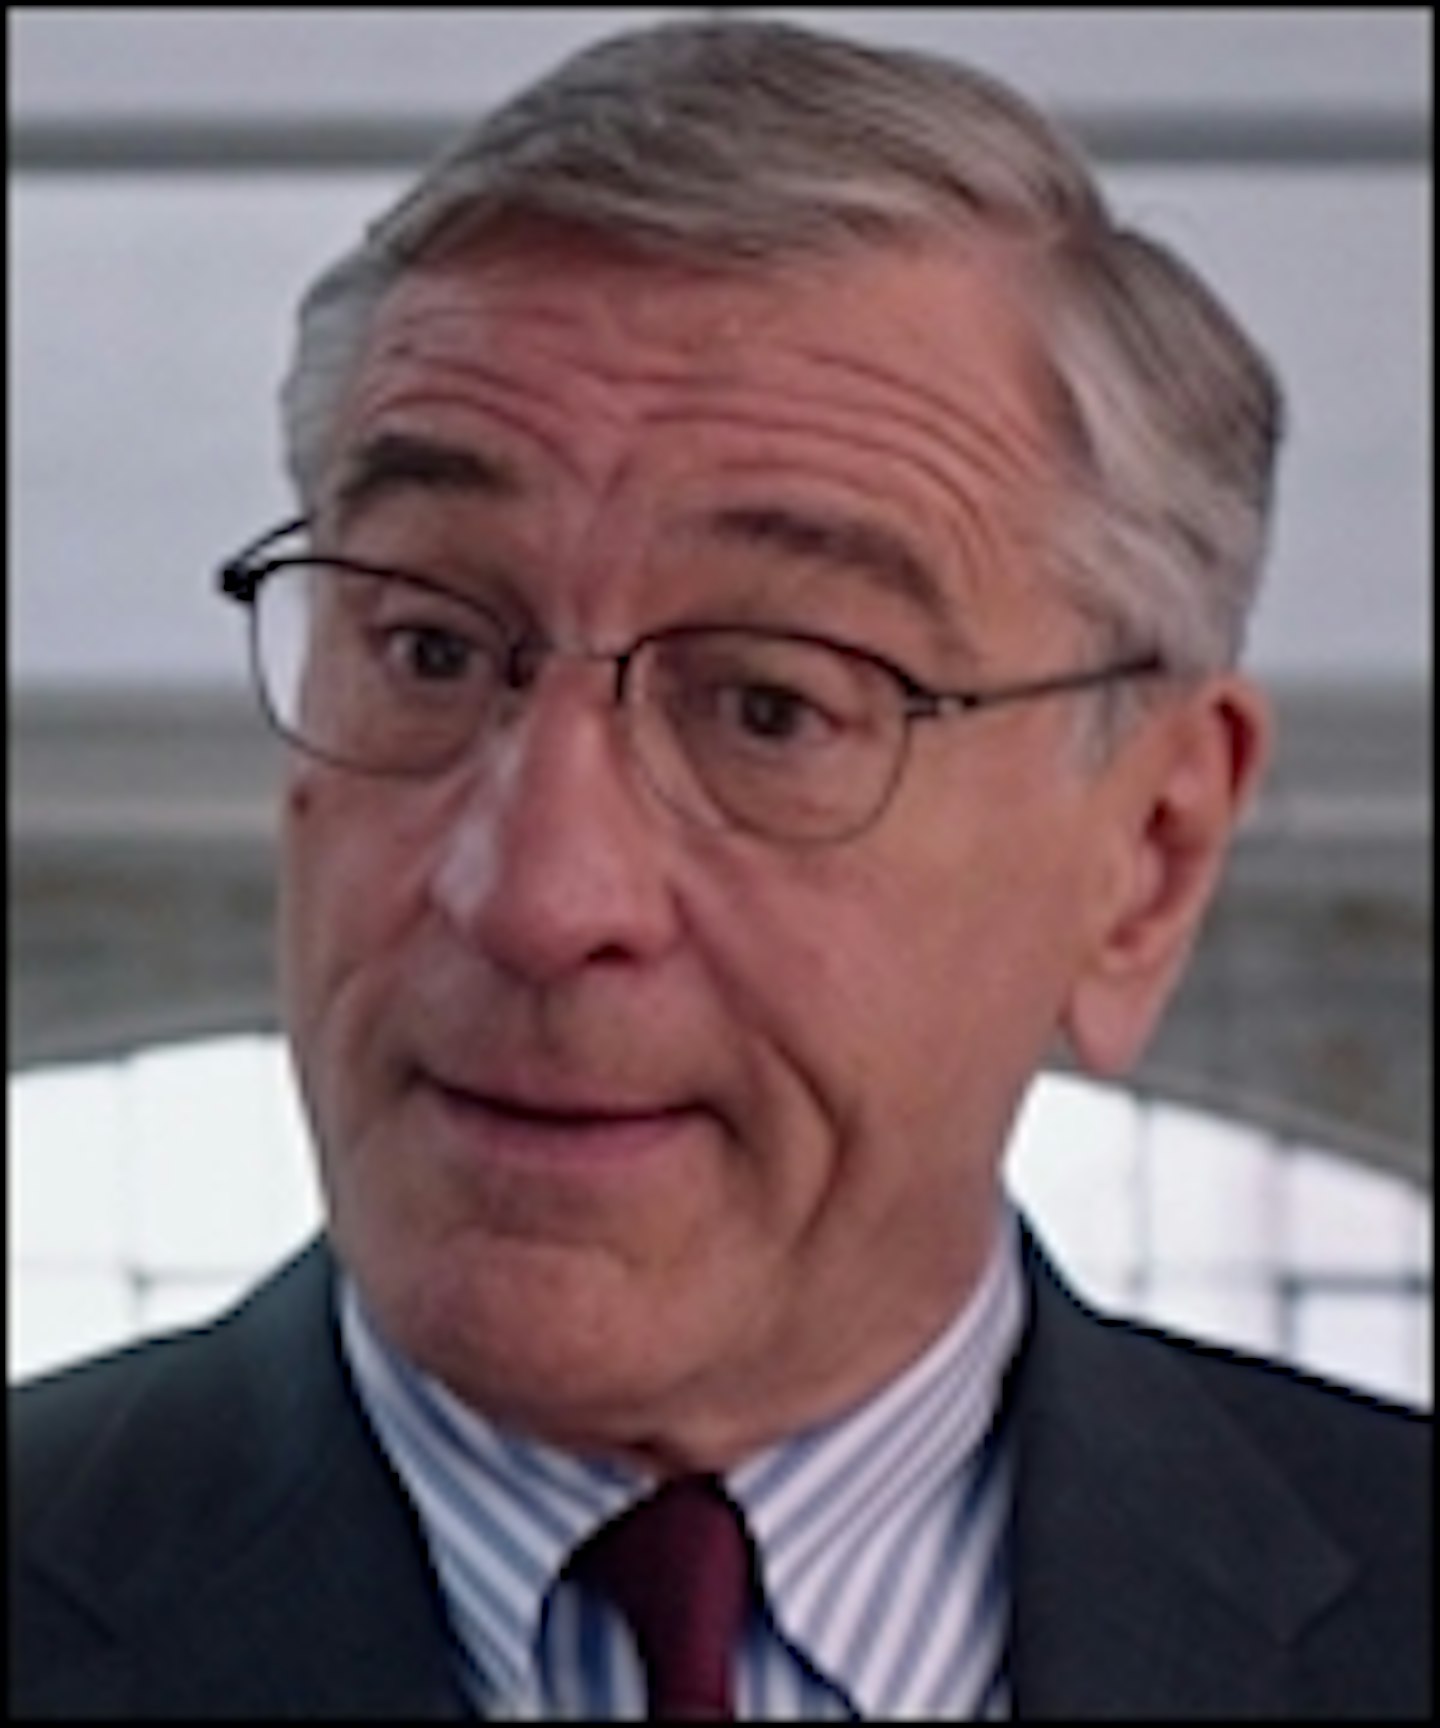 New Trailer For The Intern